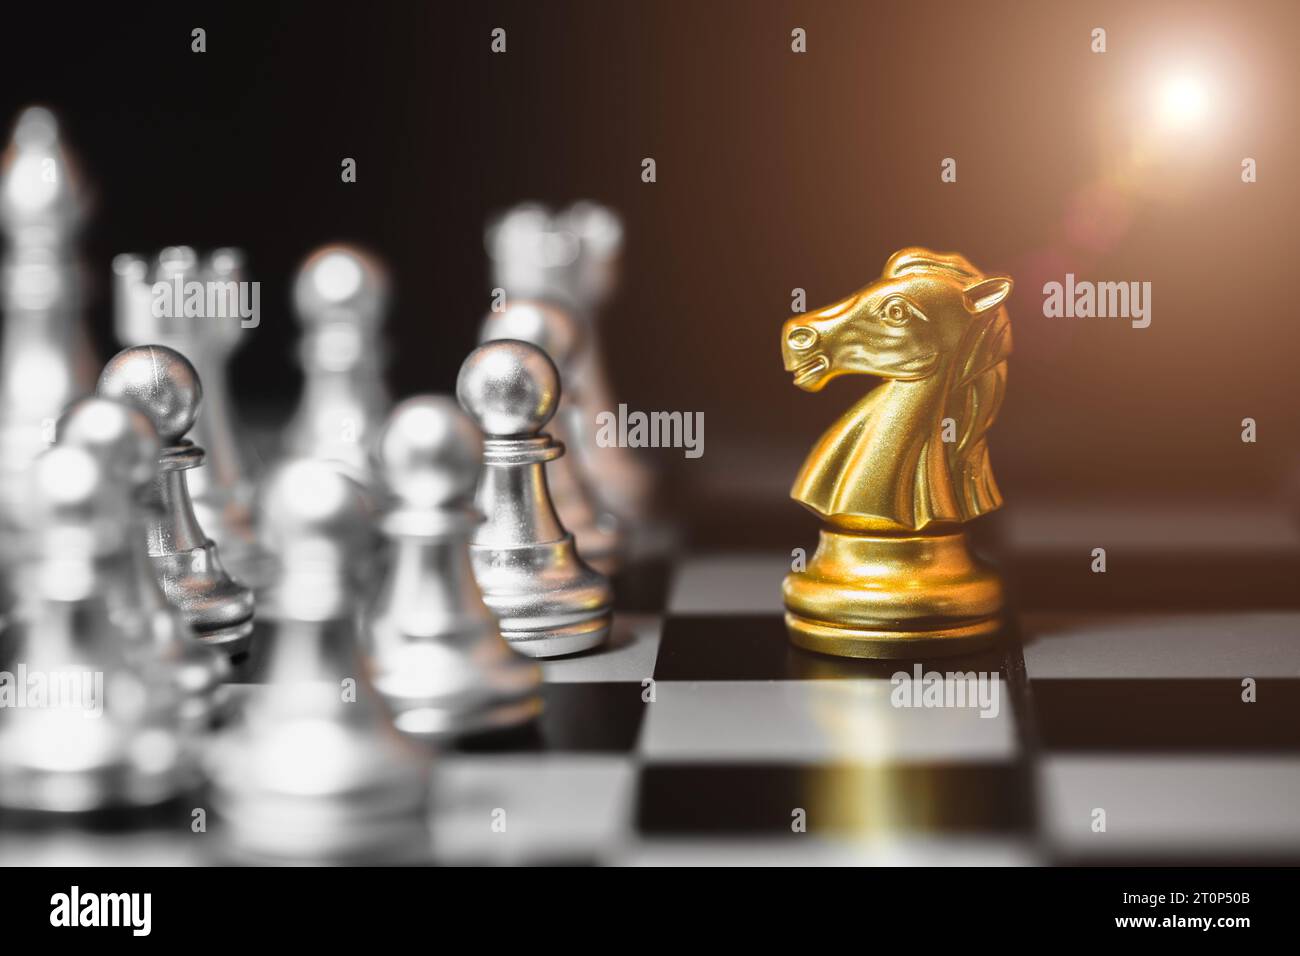 Gold Knight Horse Chess Piece for CEO Business Team Leader Successful Executive Manager Concept Stock Photo